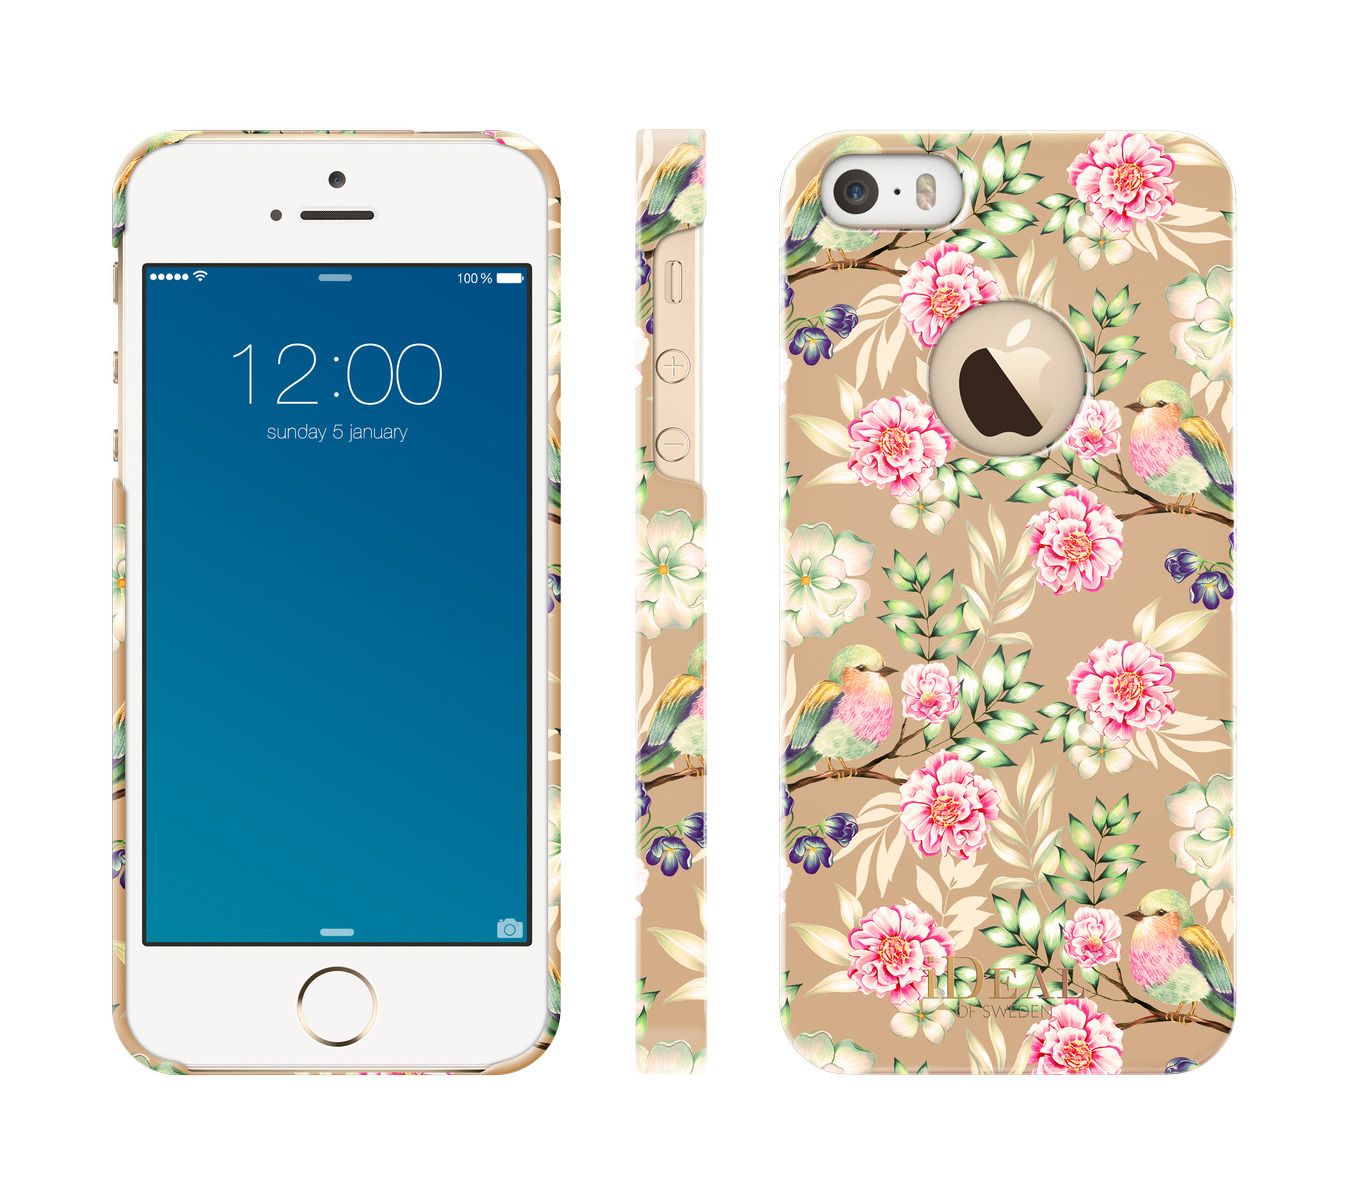 Backcover, SWEDEN Champagne (2016), Apple, SE OF Fashion, Birds iPhone IDEAL